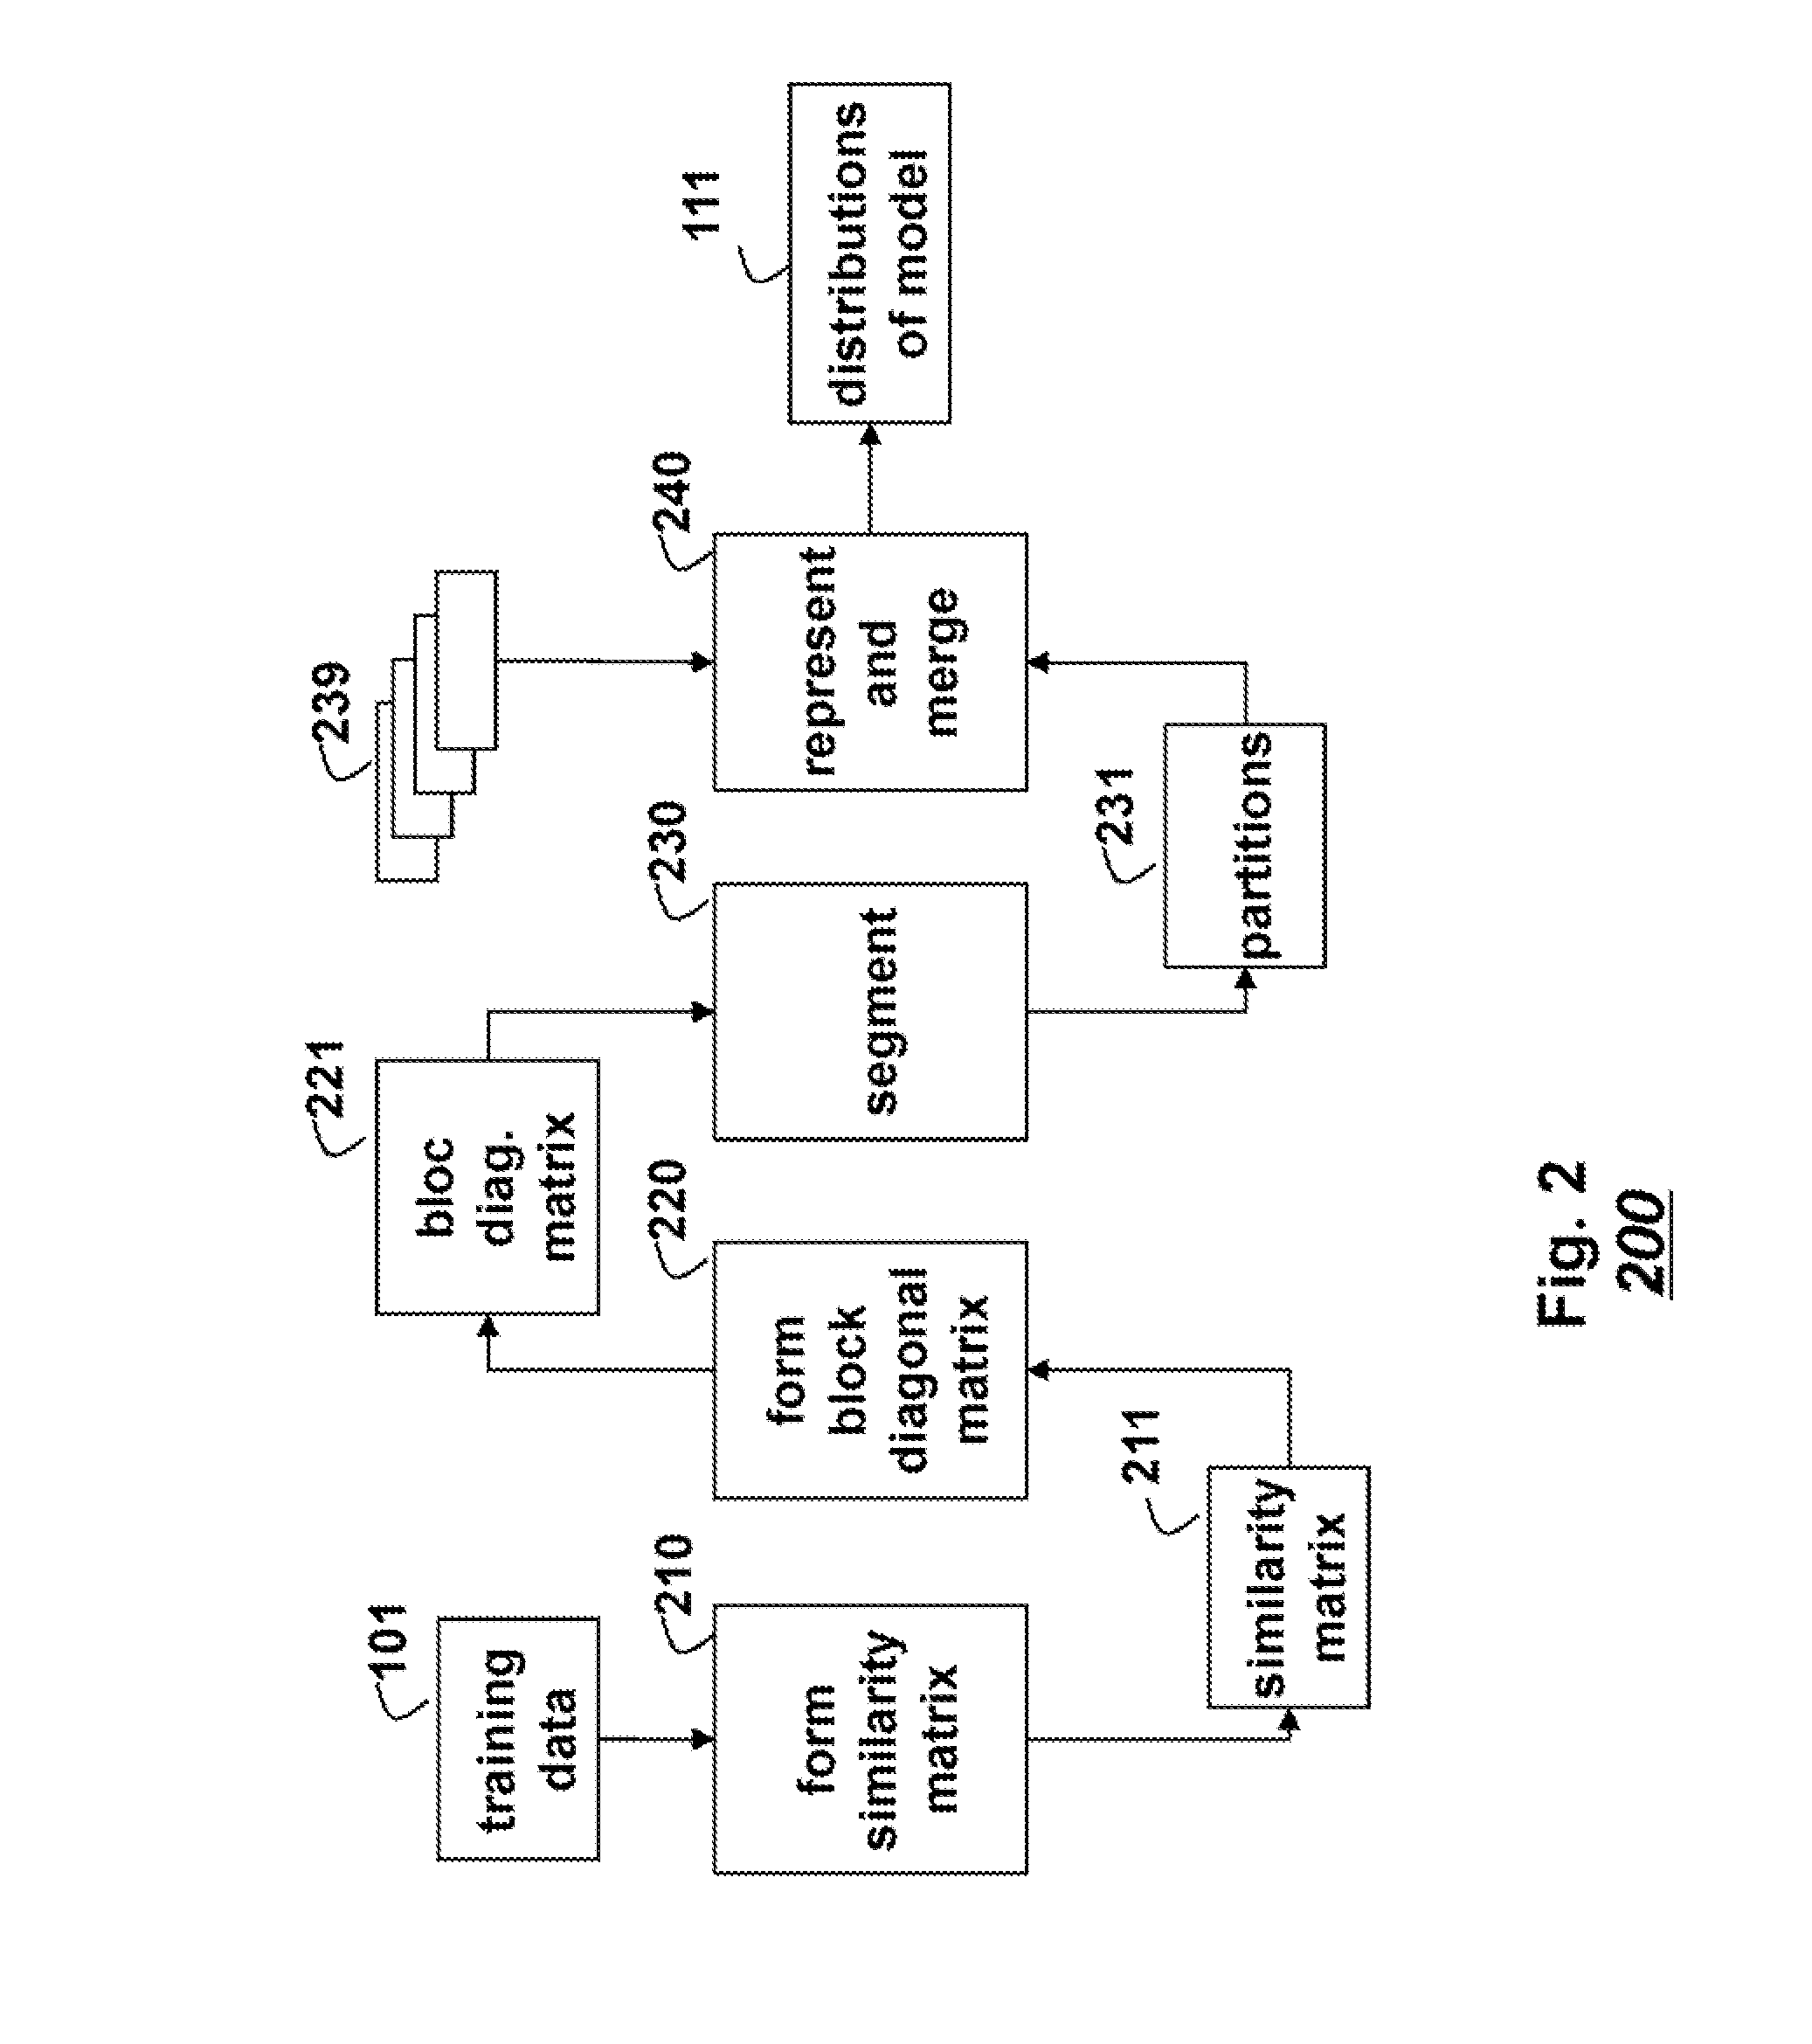 Method for Detecting Anomalies in Multivariate Time Series Data